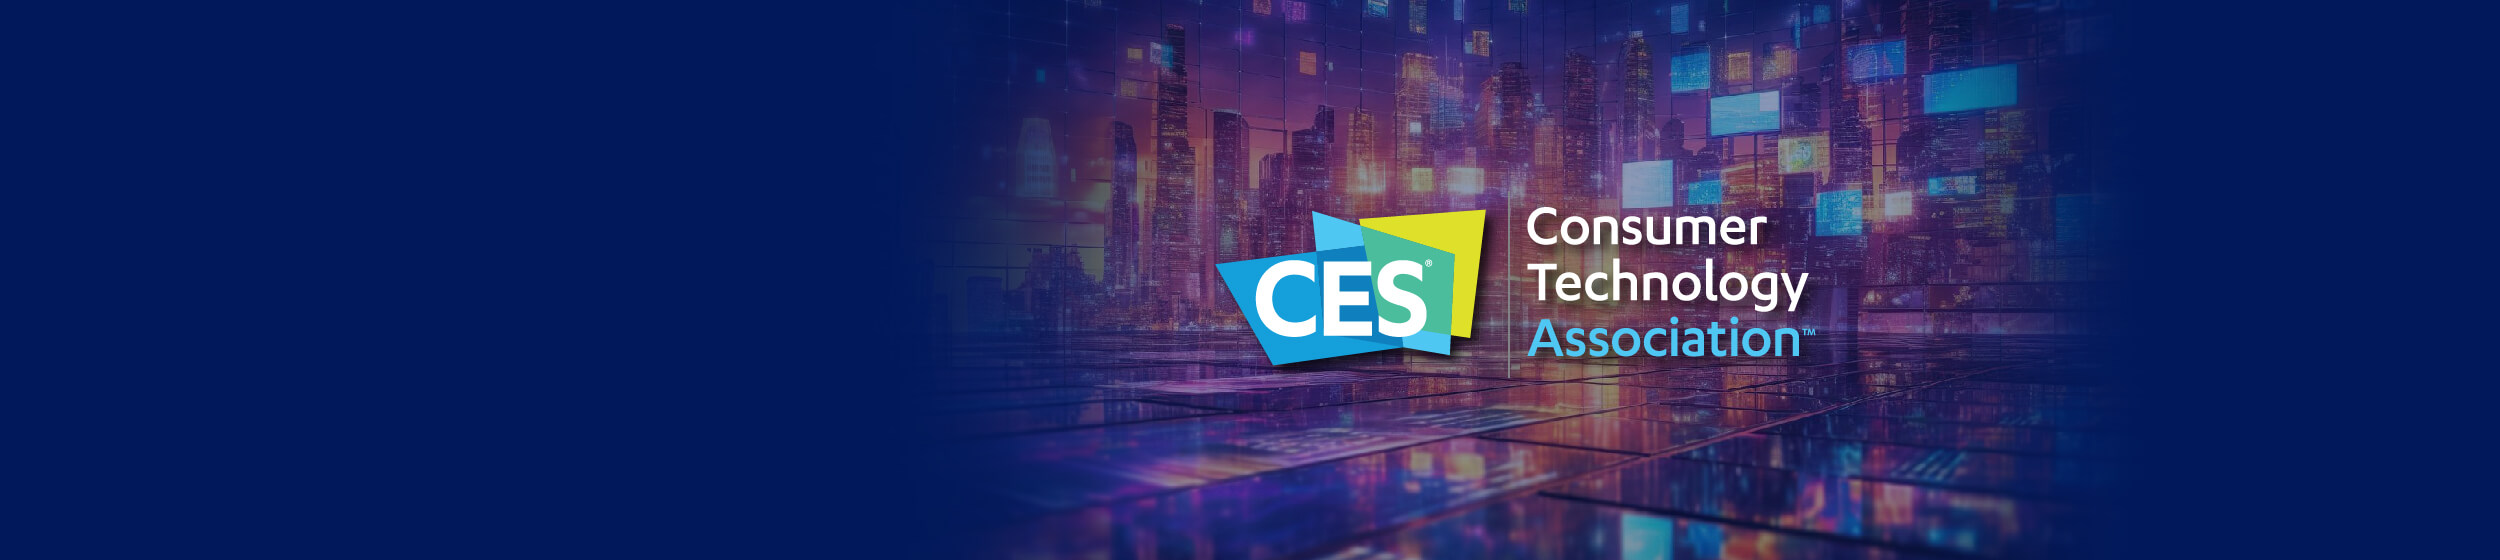 Banner-CES Home Page